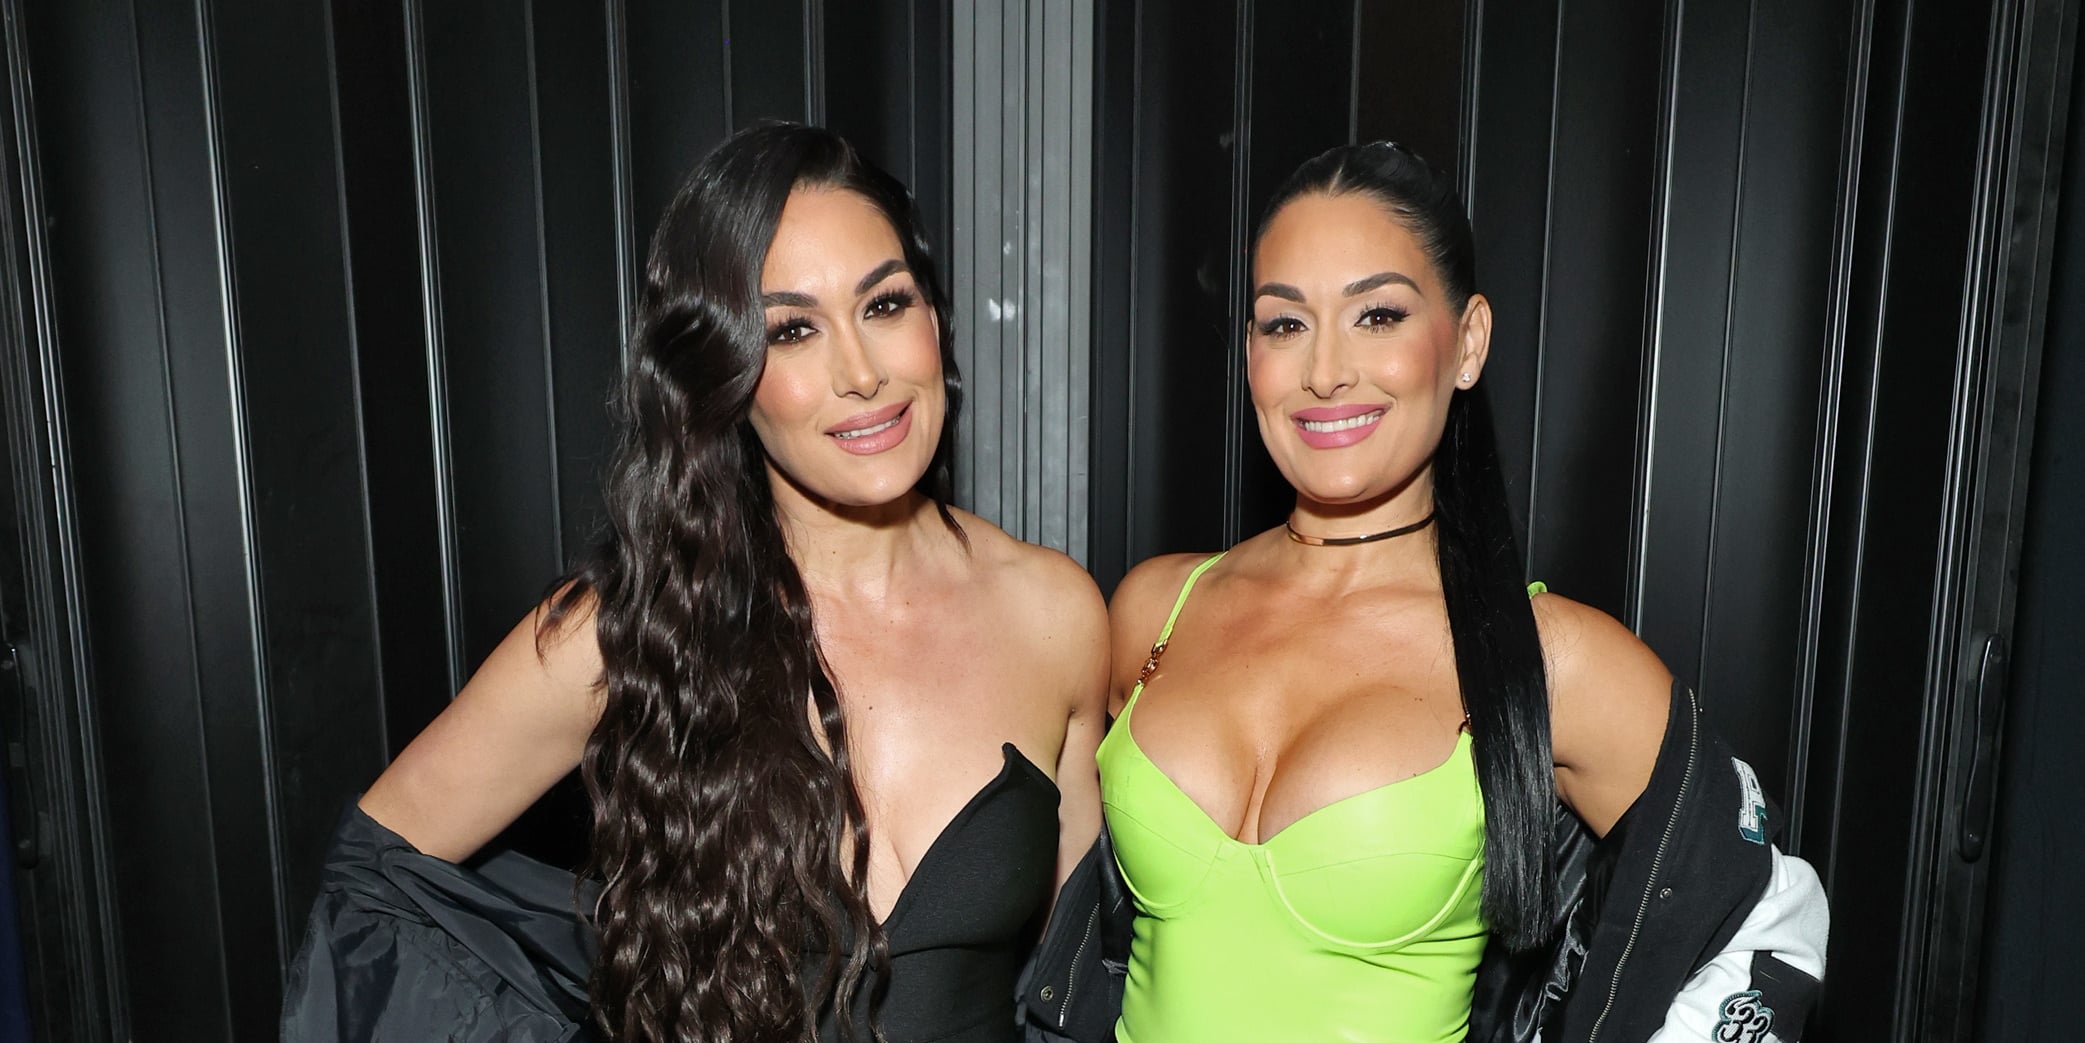 Brie and Nikki Bella attend FIT Fashion Show in New York City